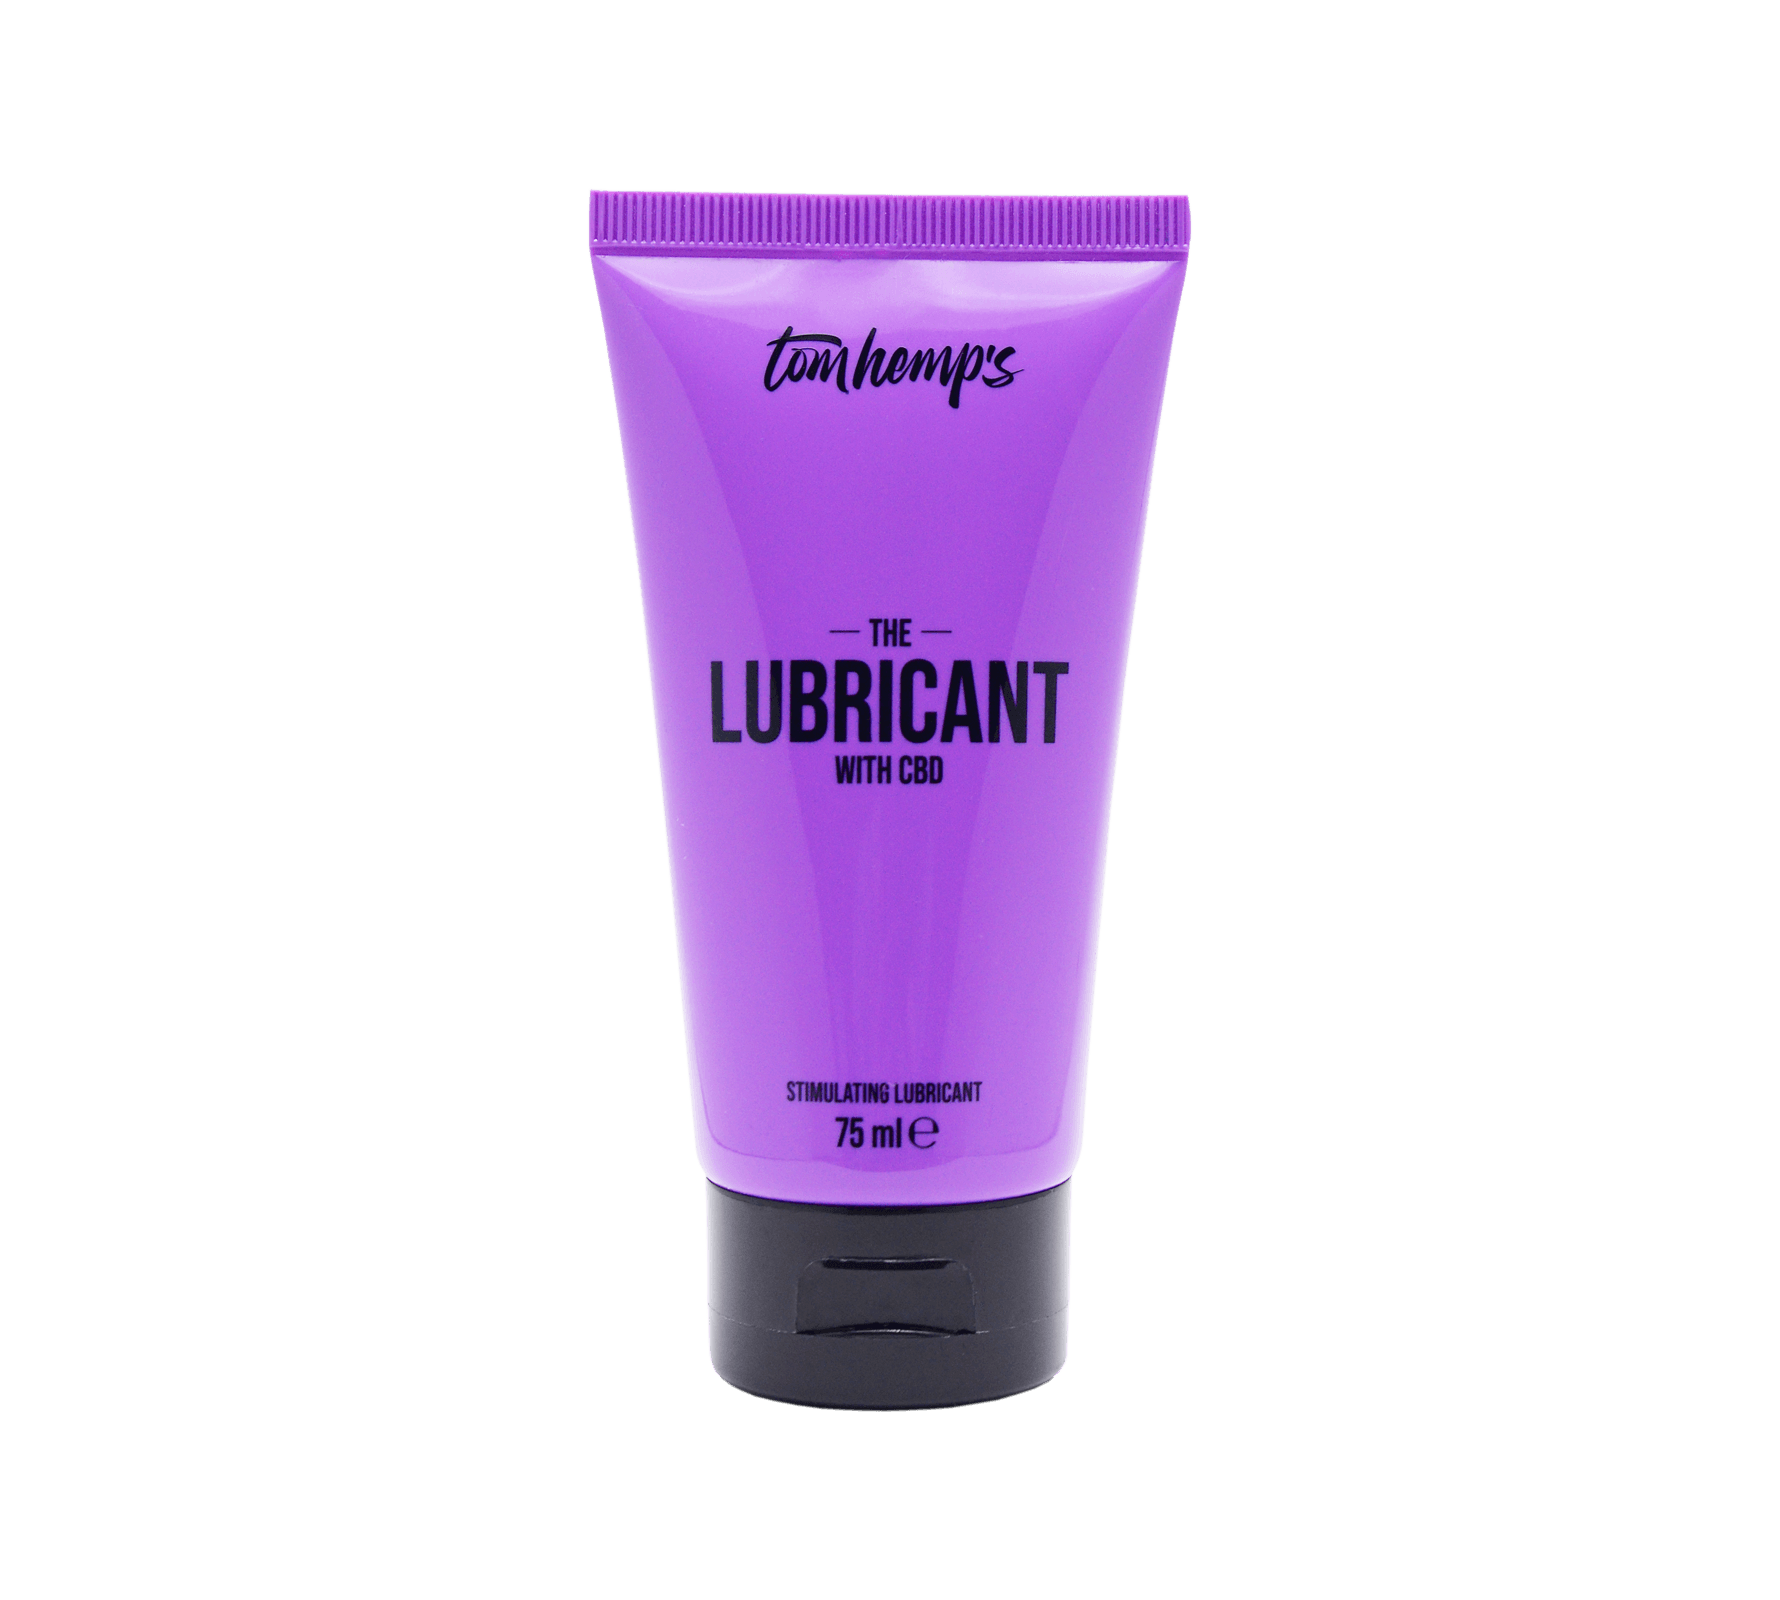 The Lubricant